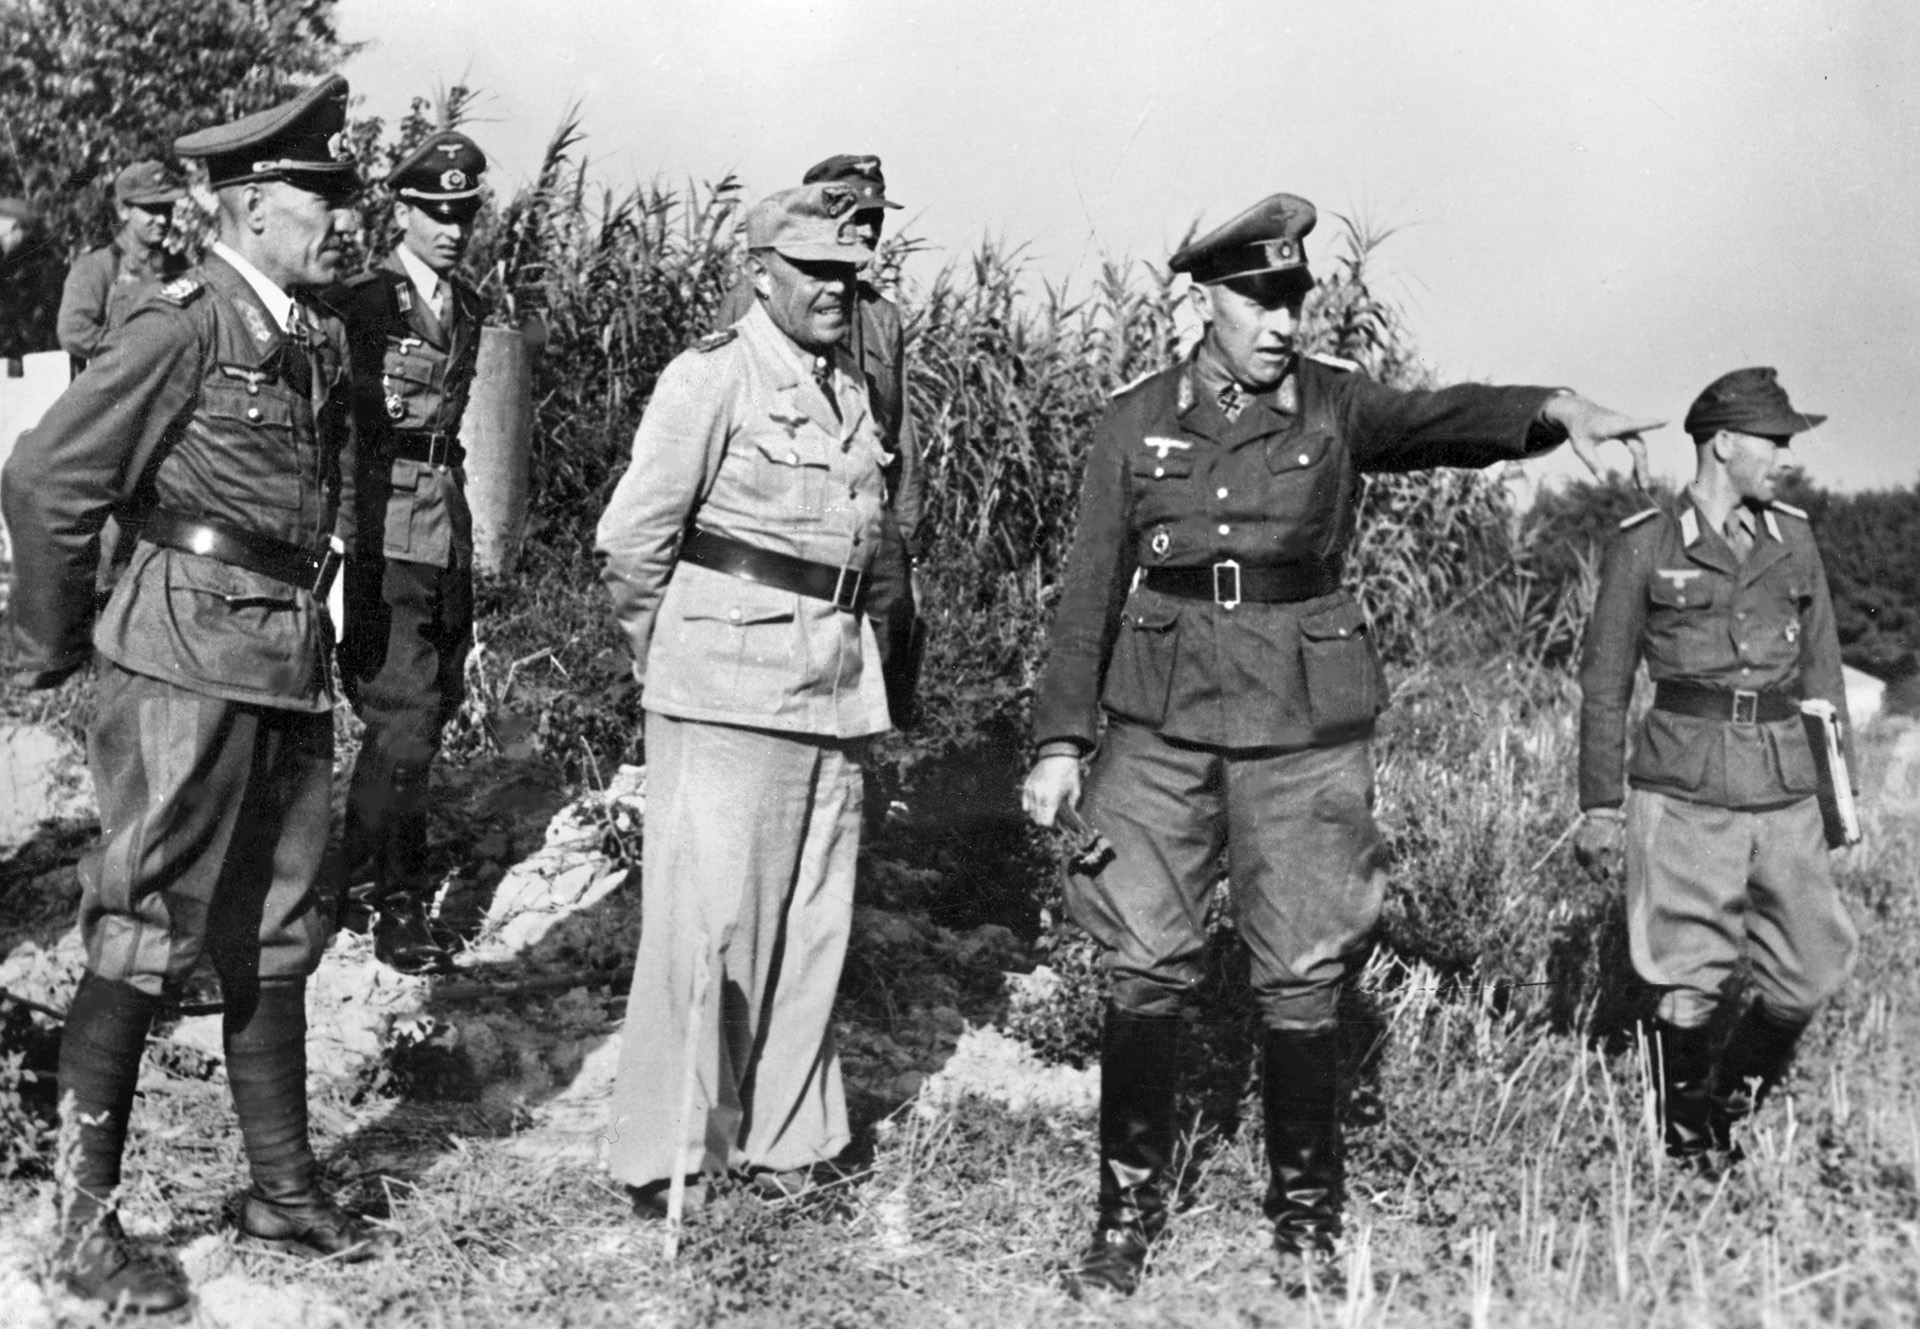 A staff officer points to a location among the German defenses in Italy in October 1944 as Field Marshal Albert Kesselring, commander of German forces in Italy, looks on during an inspection tour. Kesselring skillfully managed a fighting defense, delaying the fall of Rome for months.